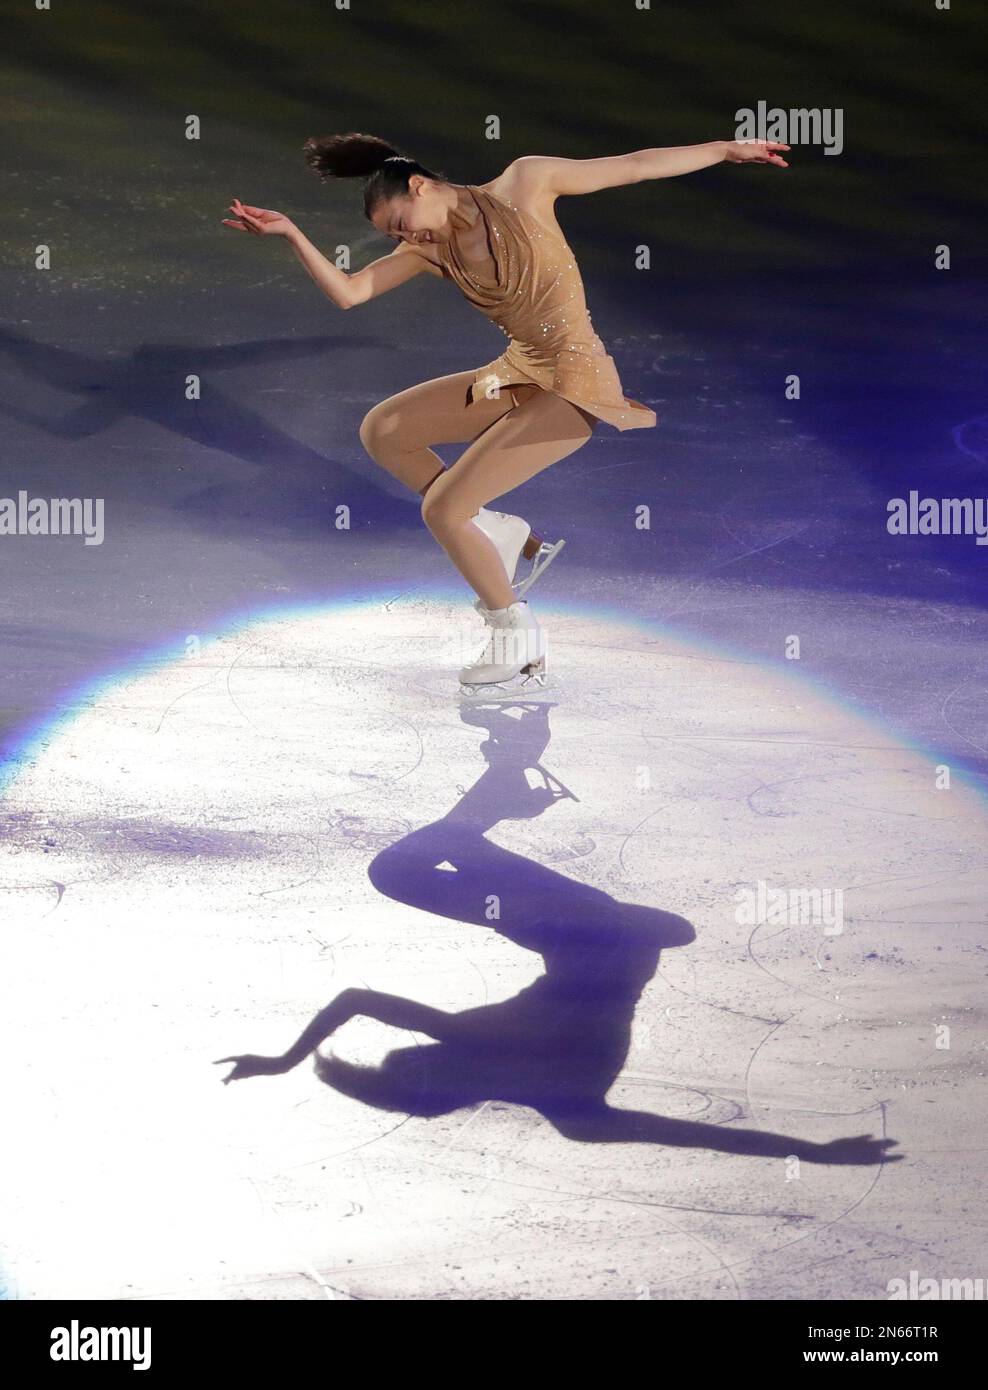 Mao Asada of Japan performs during the gala exhibition at the NHK ...